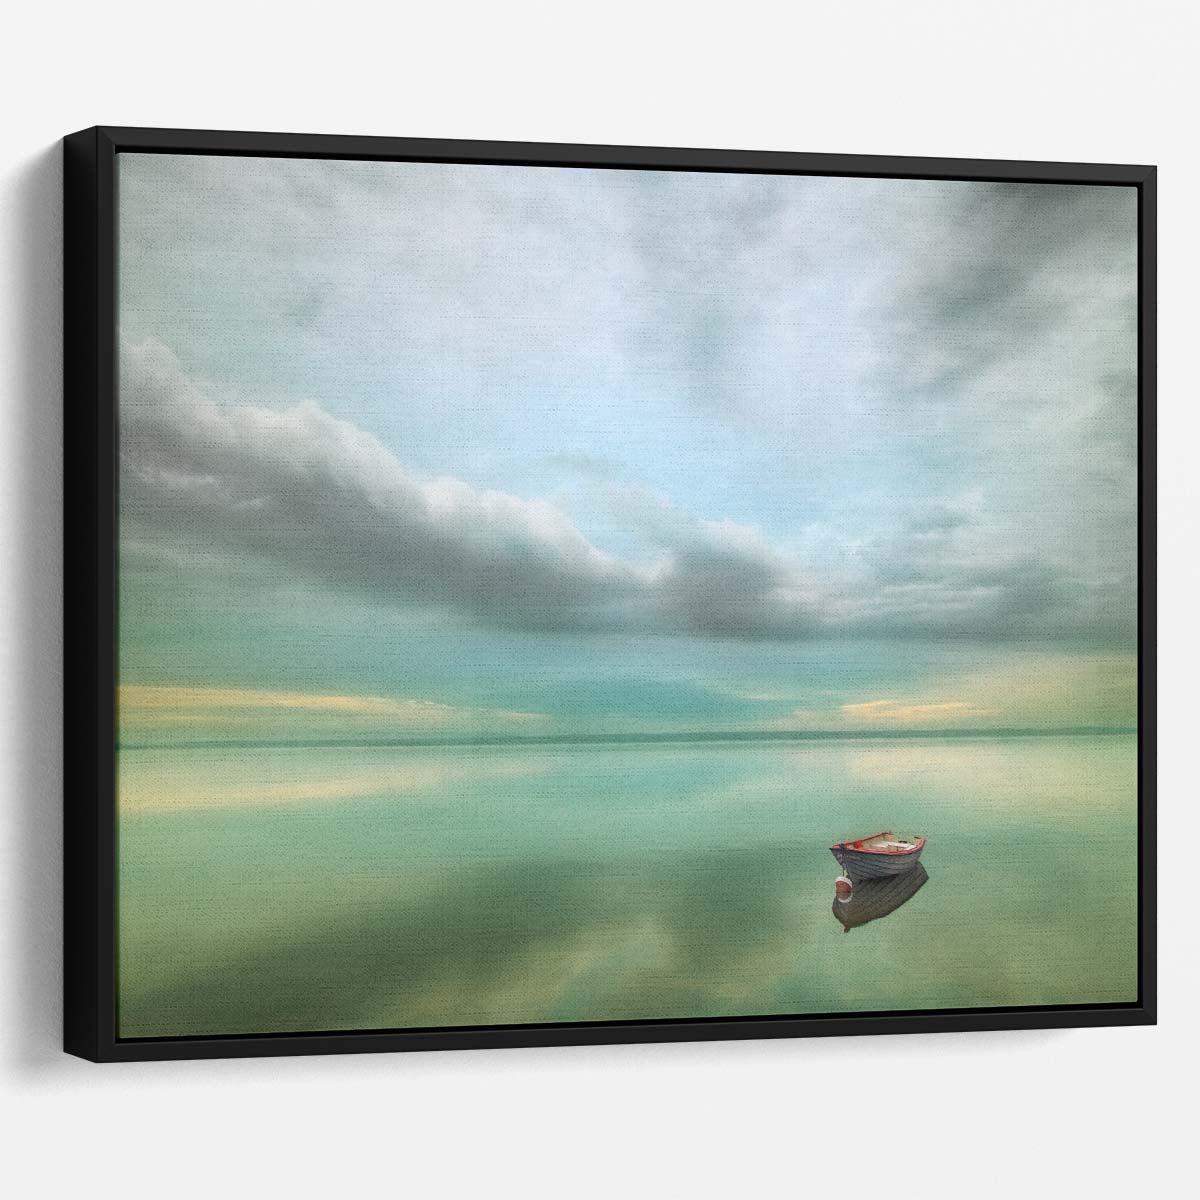 Serene Lake Solitude Peaceful Boat Landscape Wall Art by Luxuriance Designs. Made in USA.